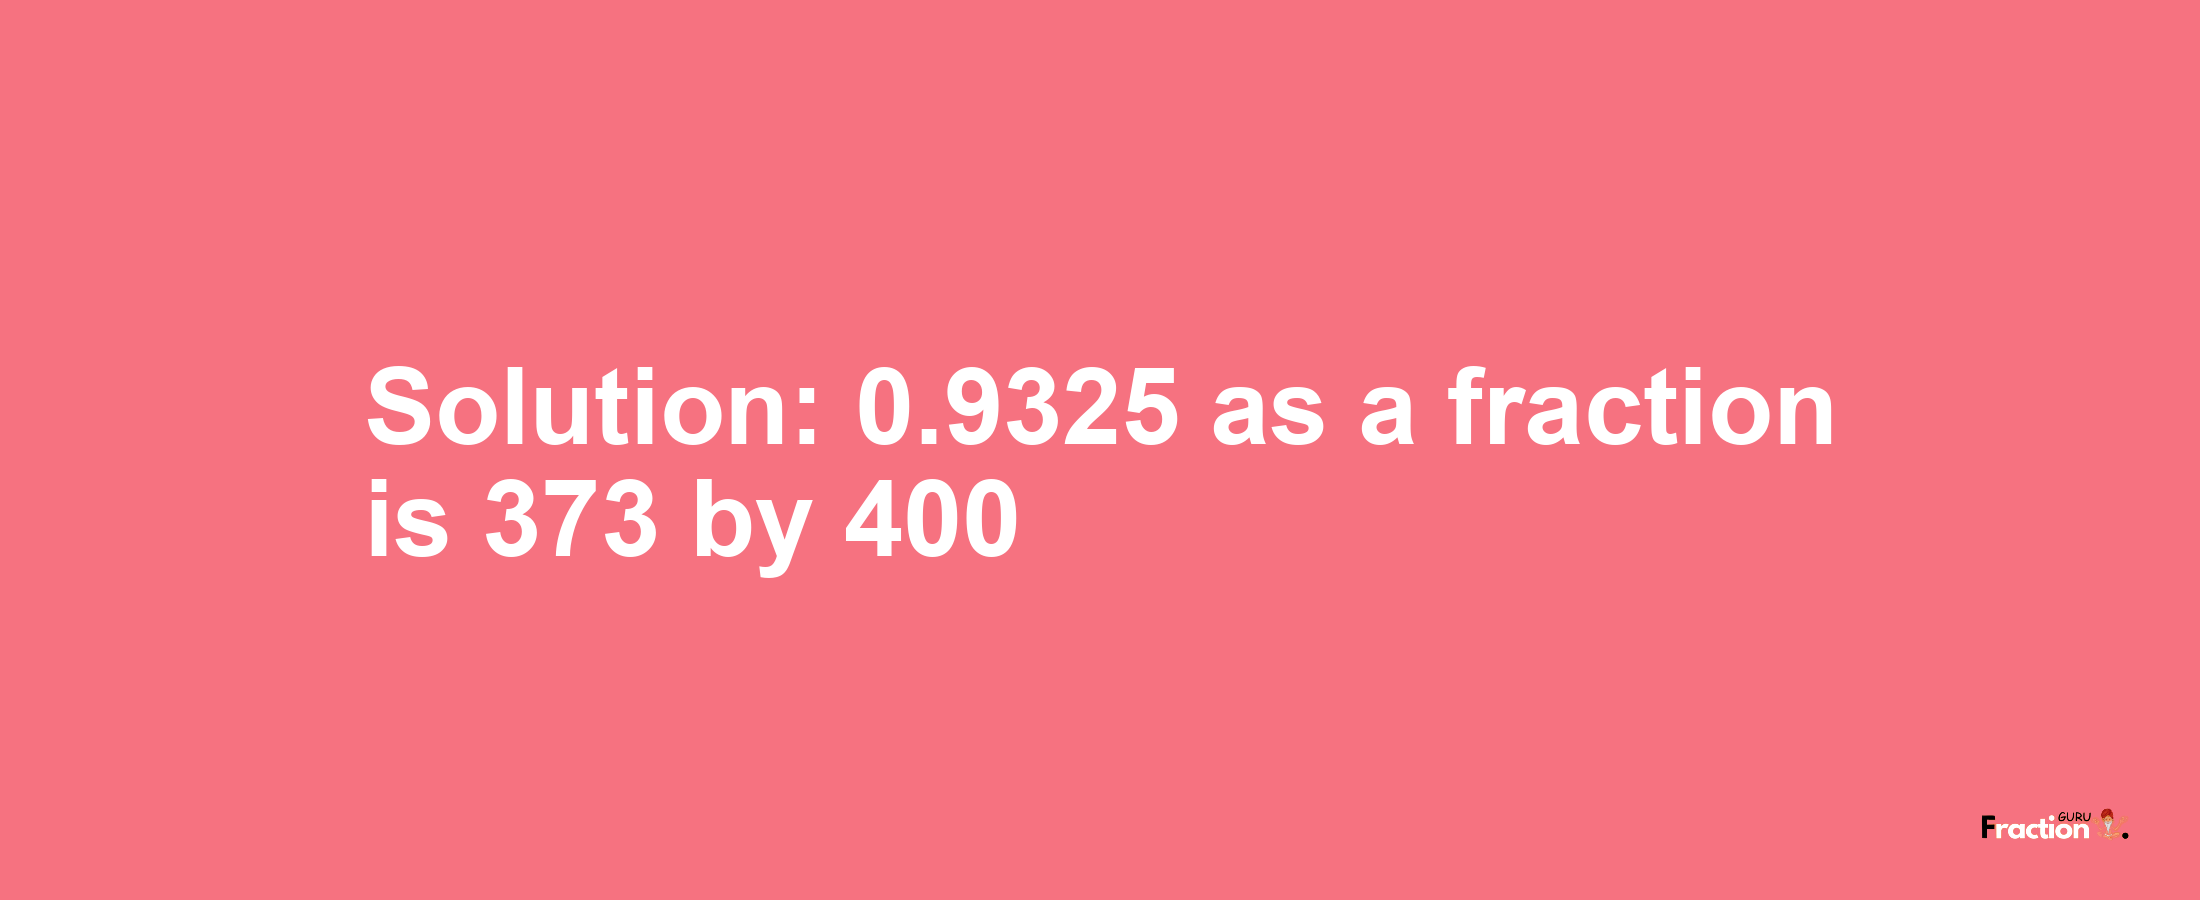 Solution:0.9325 as a fraction is 373/400